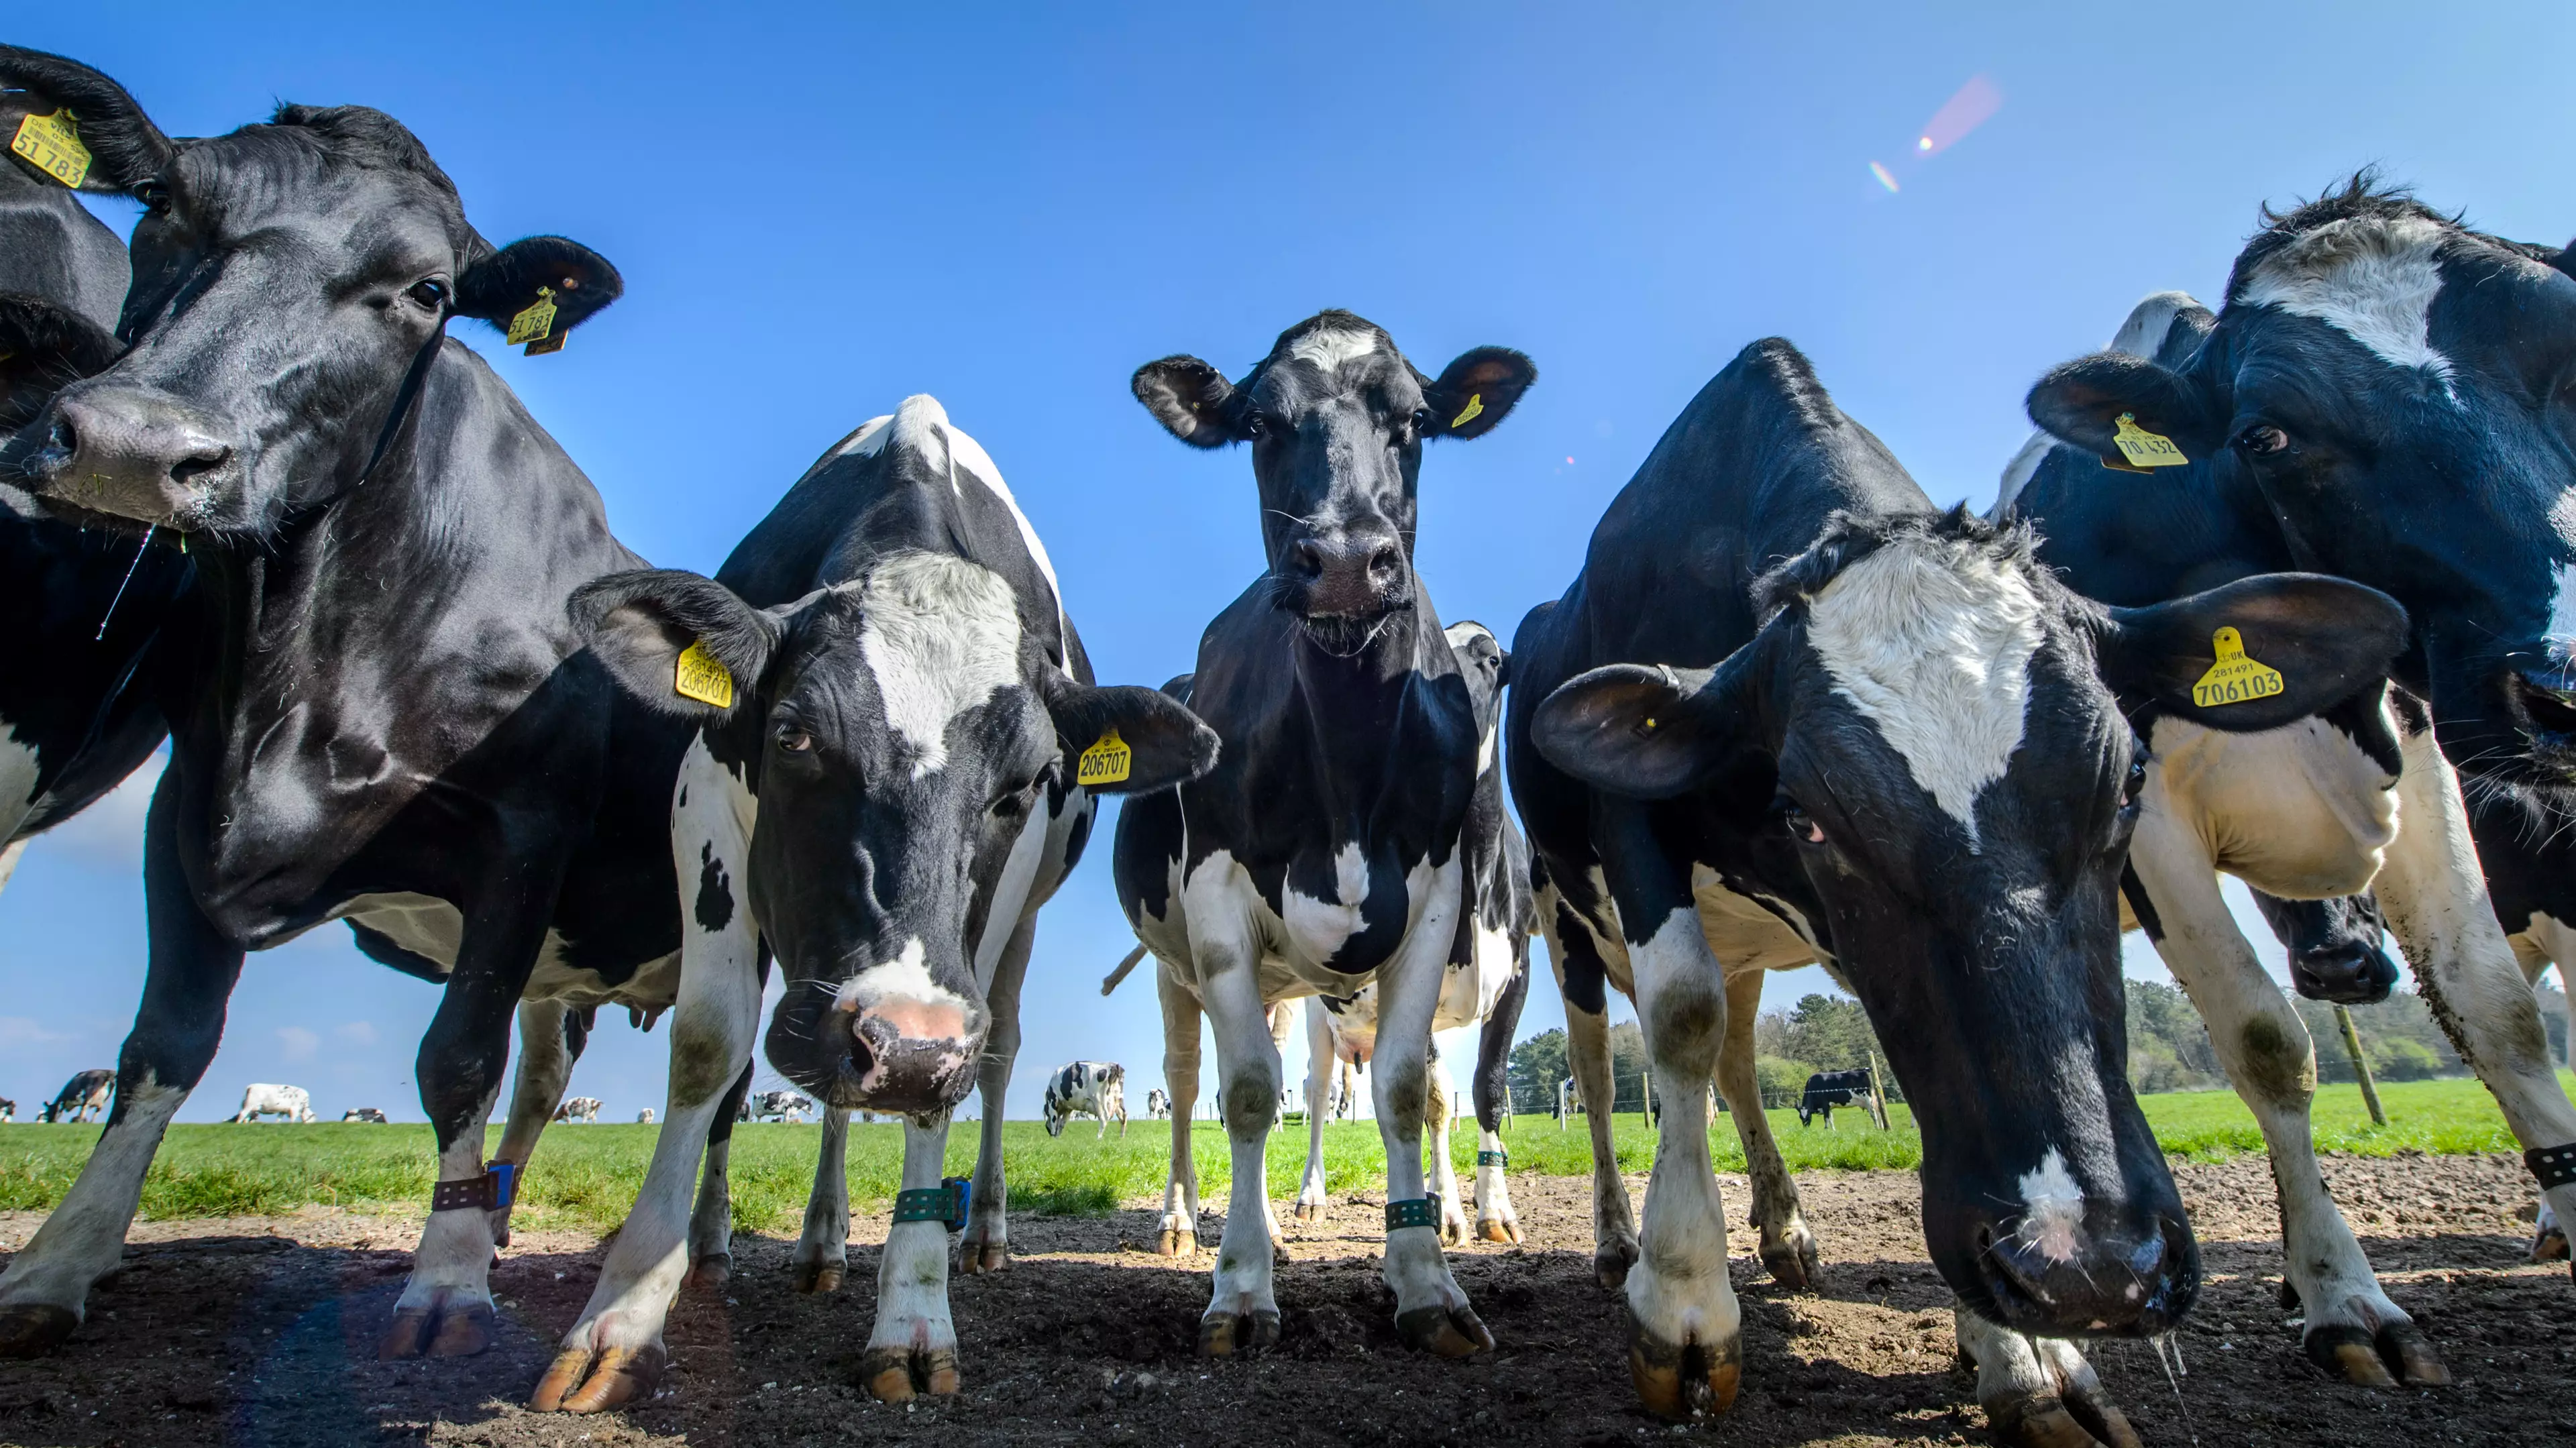 Cows 'Talk' To Each Other Using Their Moos, According To New Study